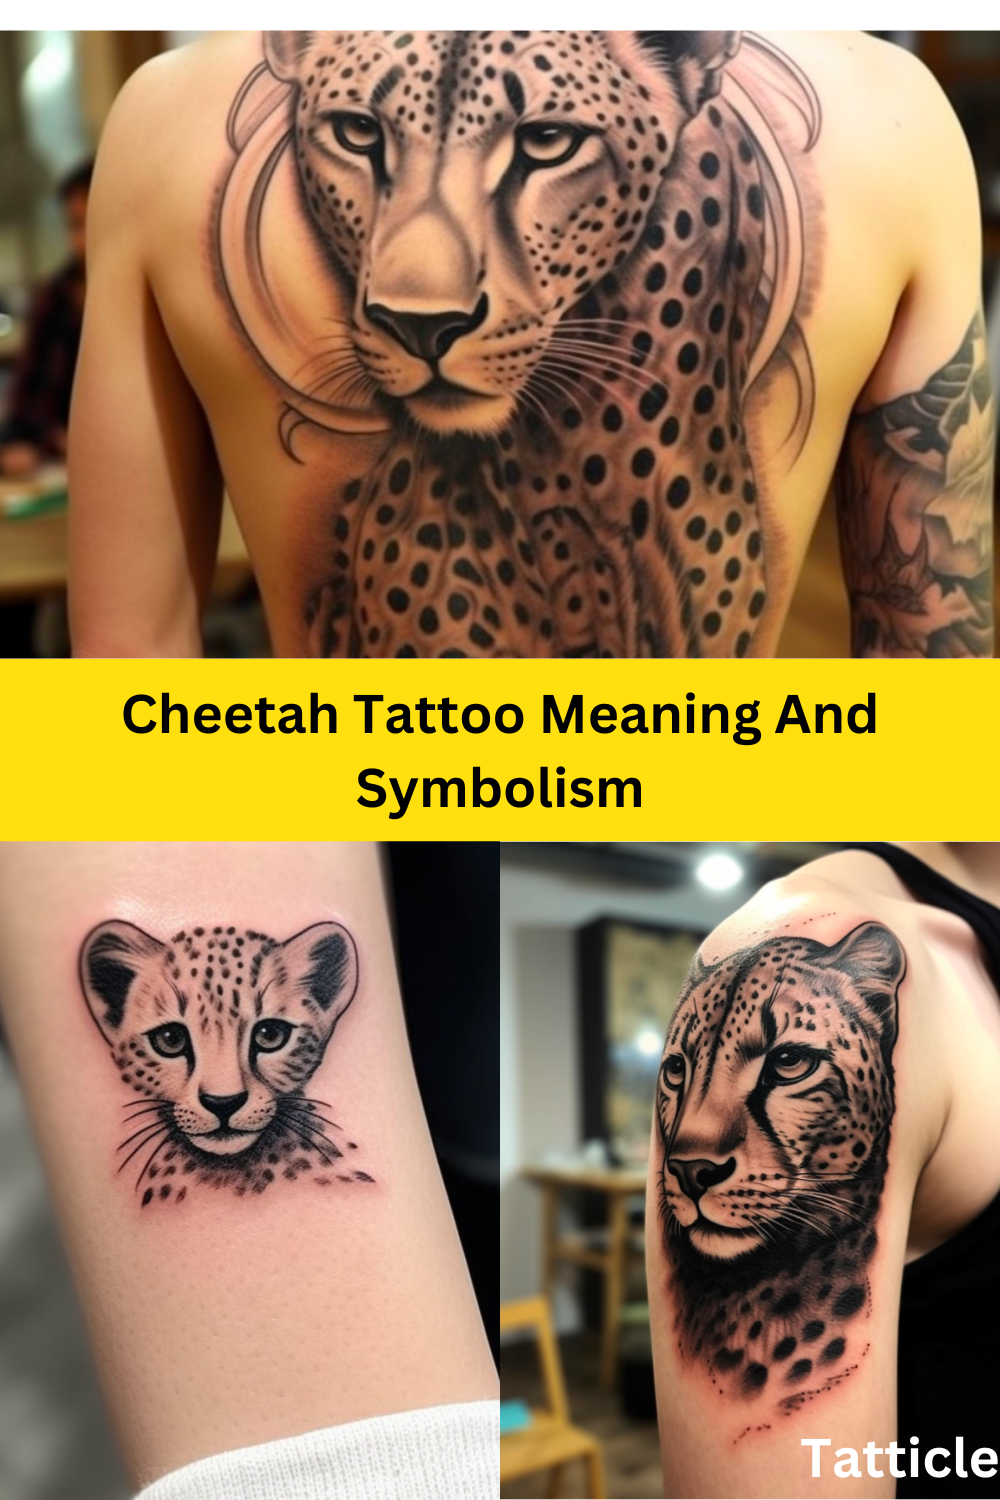 Cheetah Tattoo Meaning And Symbolism - Tatticle